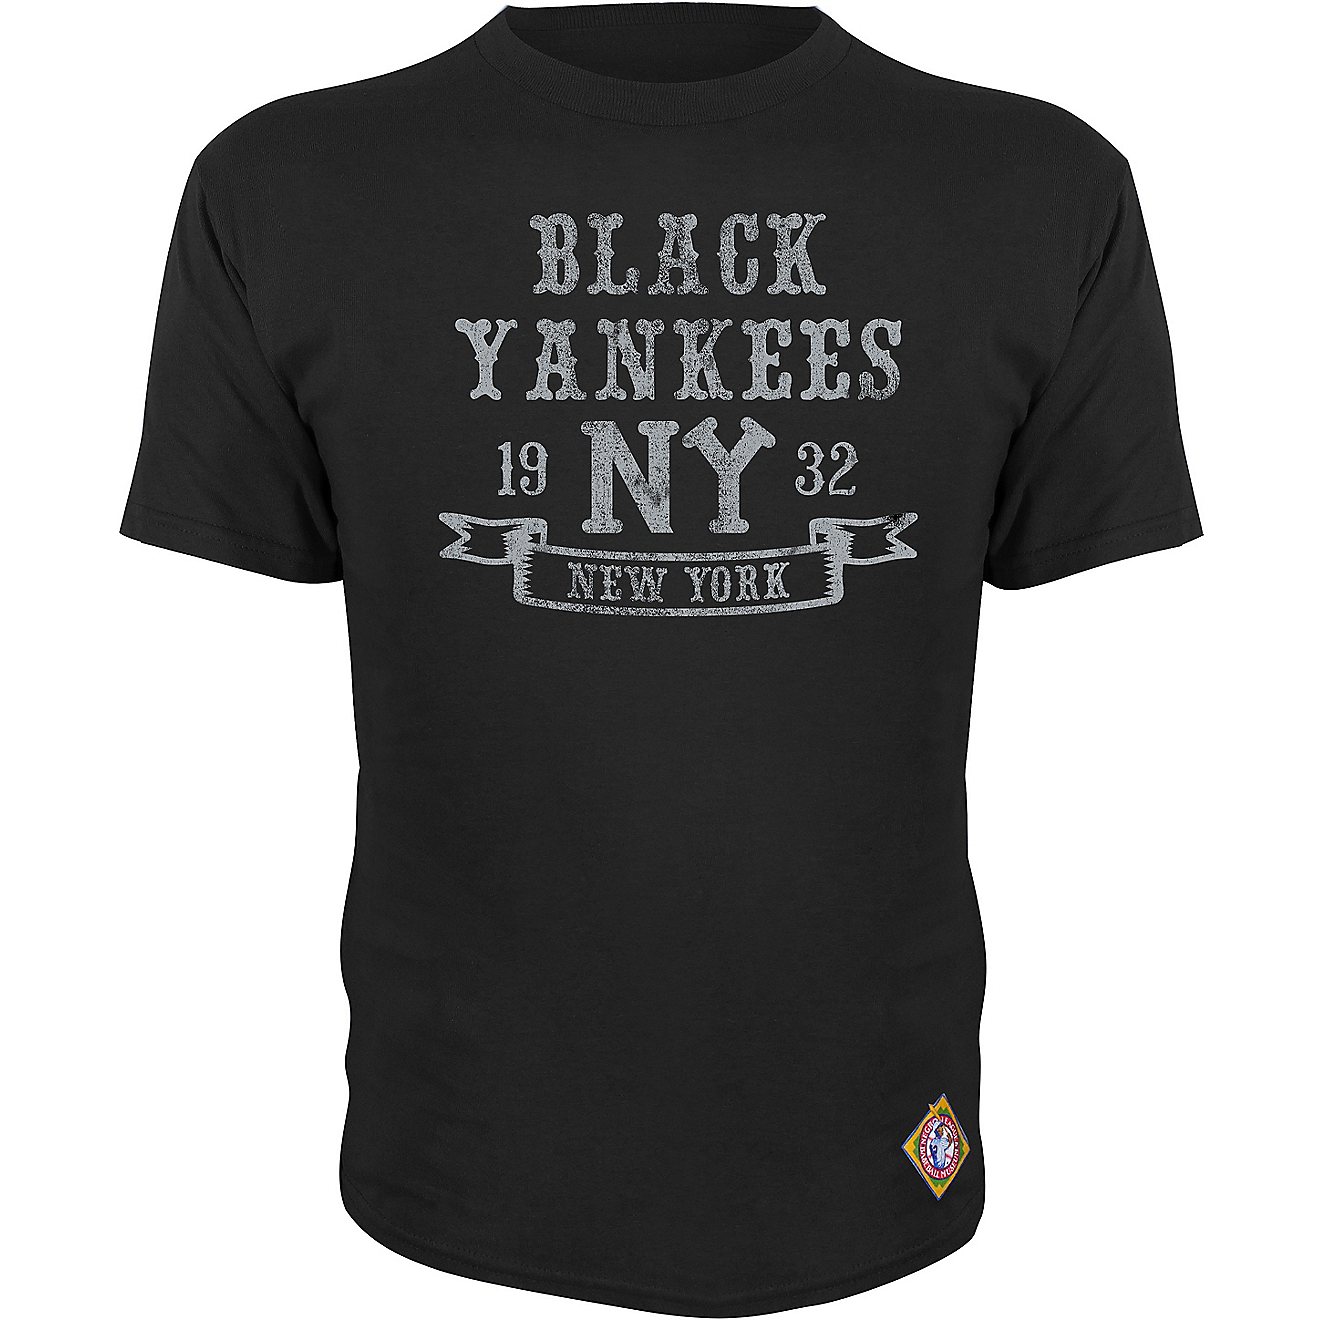 Stitches Men's Black Yankees Team Graphic Short Sleeve T-shirt                                                                   - view number 1